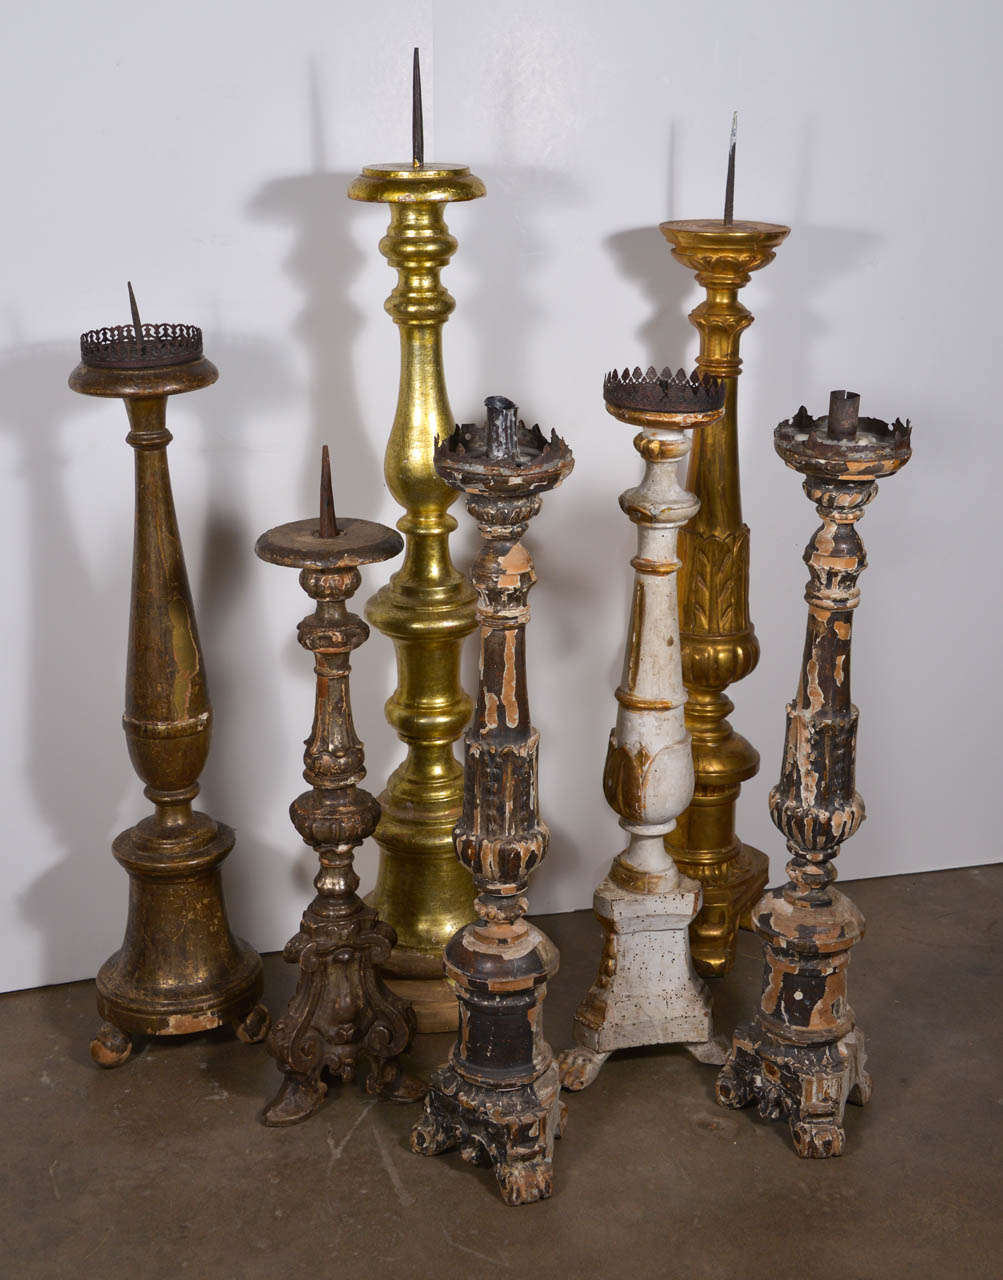 Sold Individually but shown as a group are a variety of gilt, painted and silver leaf candlesticks.  They range in size and price. the smallest is 27